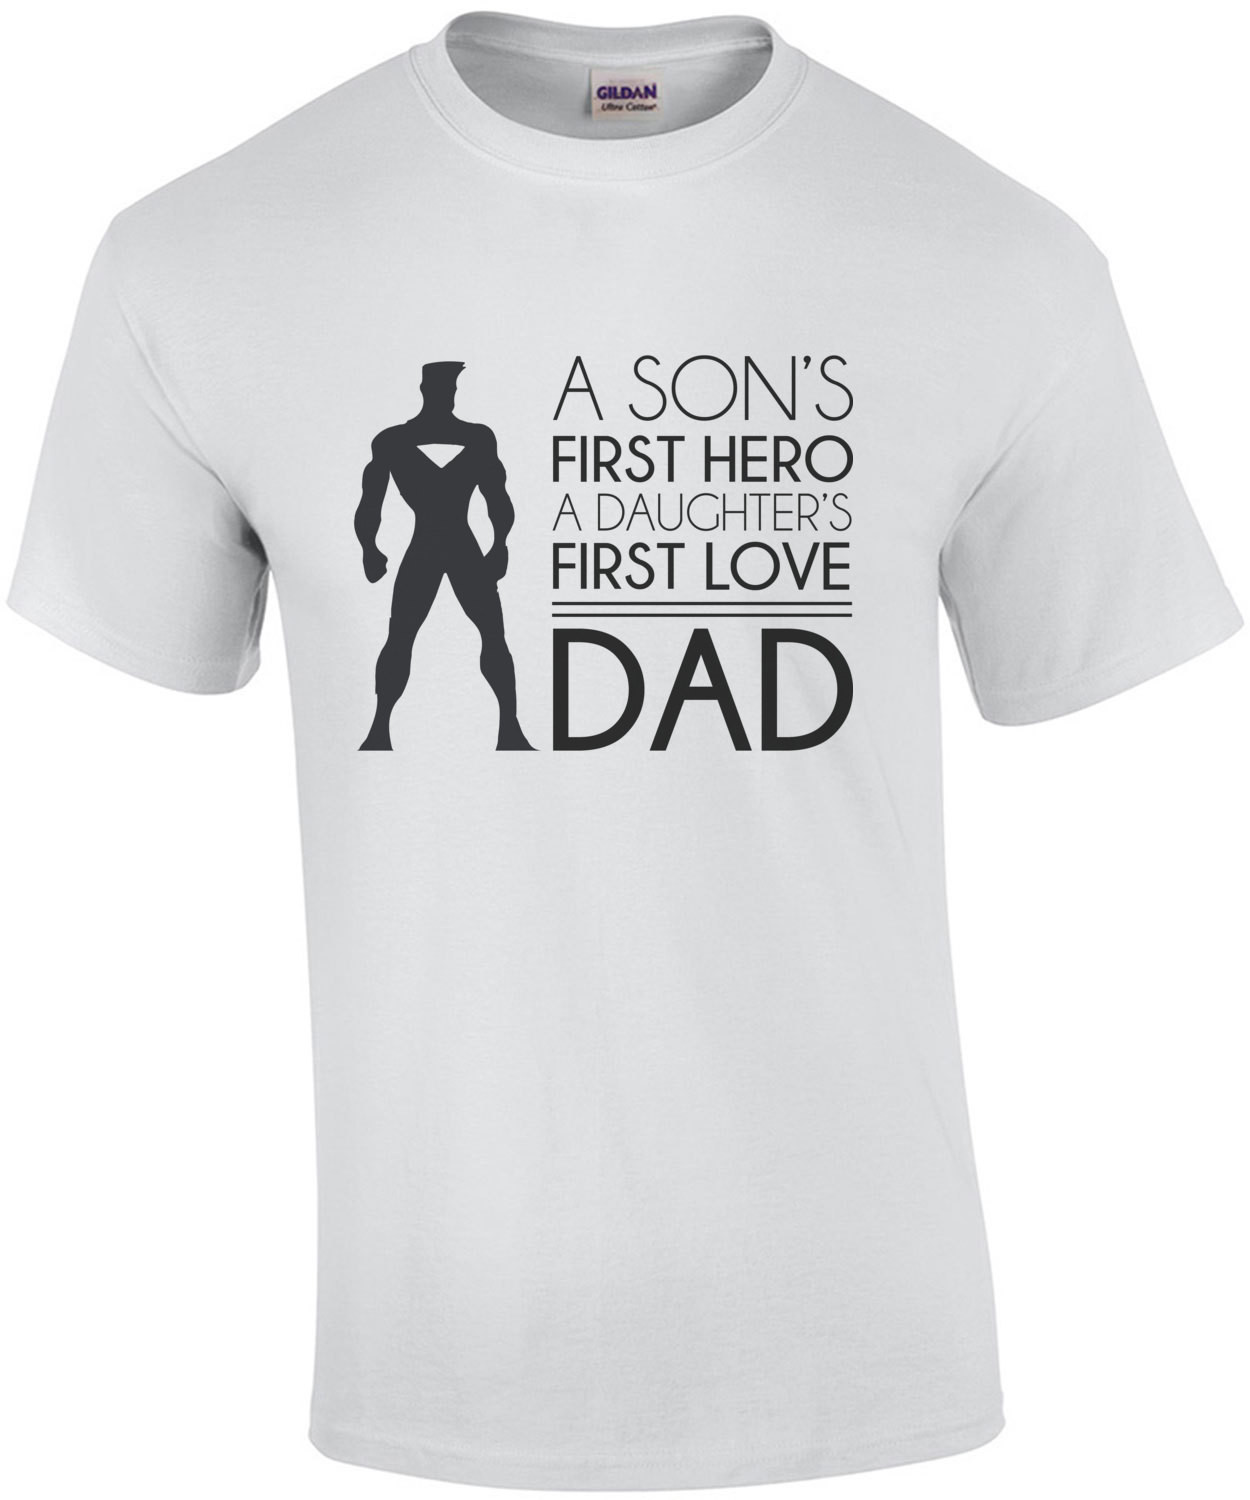 A son's first hero - A daughter's first love - Dad - Dad T-Shirt - Father's Day T-Shirt